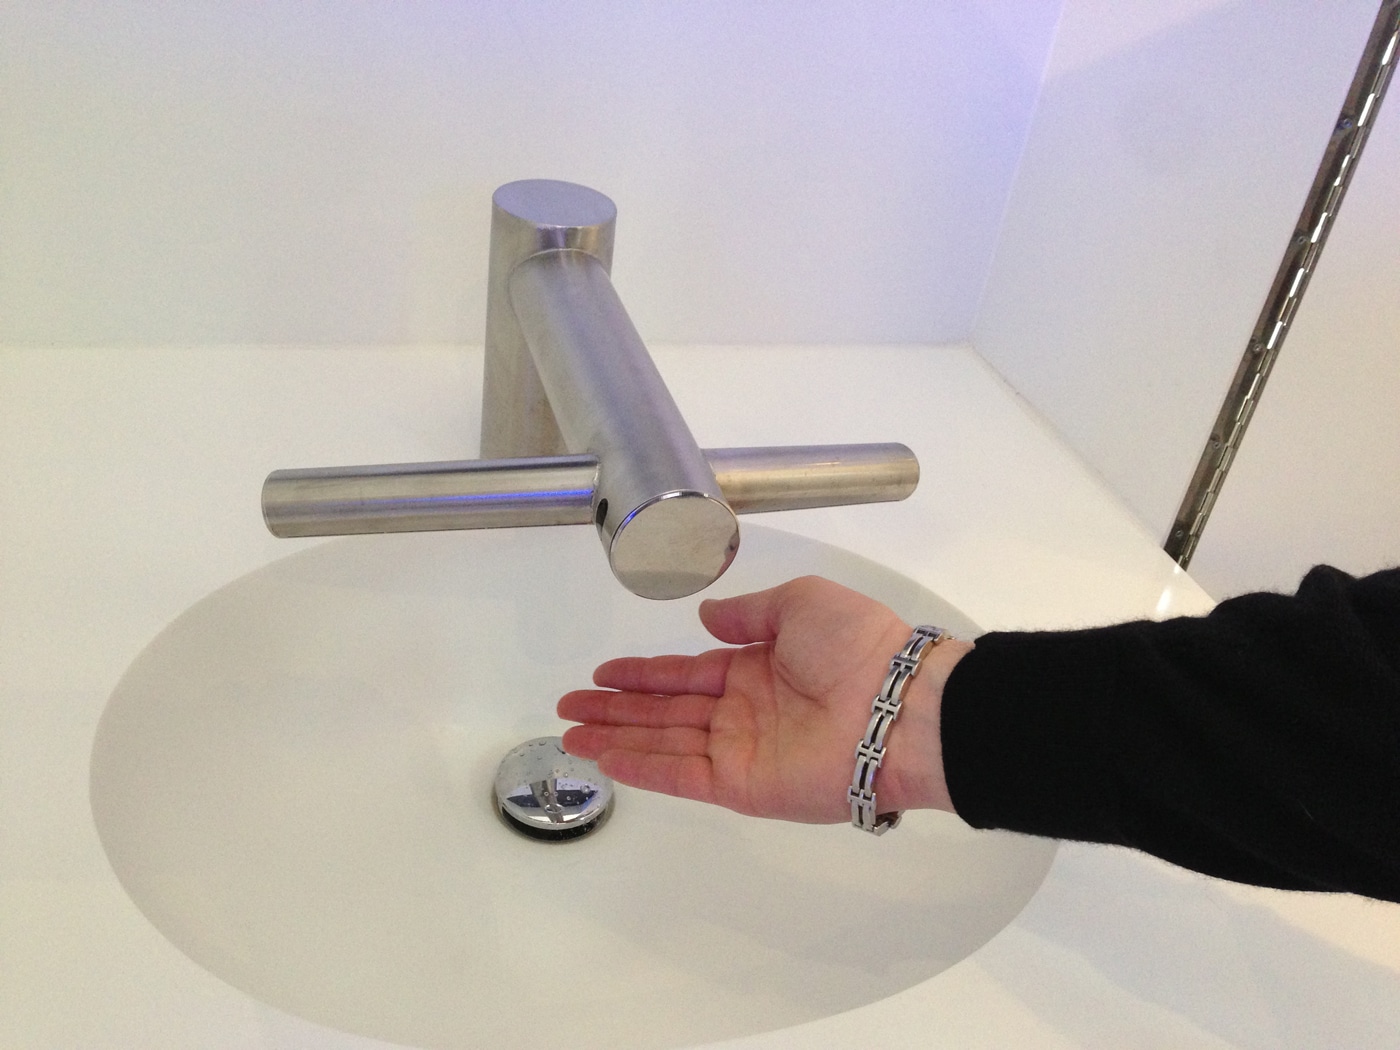 Dyson Airblade Tap Optimizes Our Entire Hand Washing & Drying Process